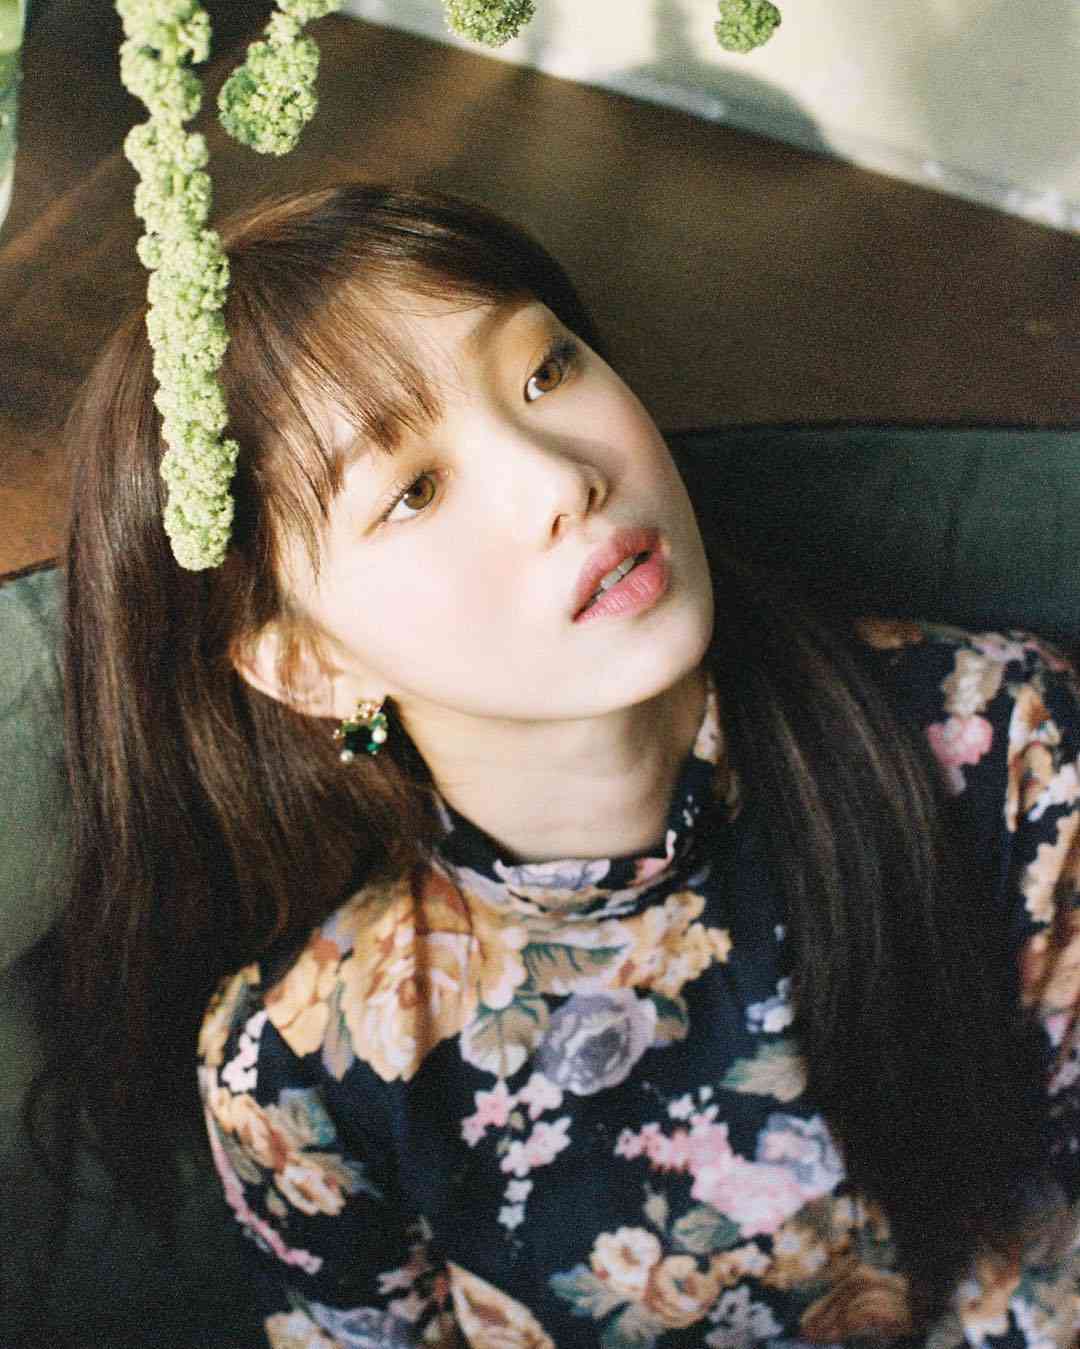 Lee Sung Kyung - Biography, Profile, Facts, and Career